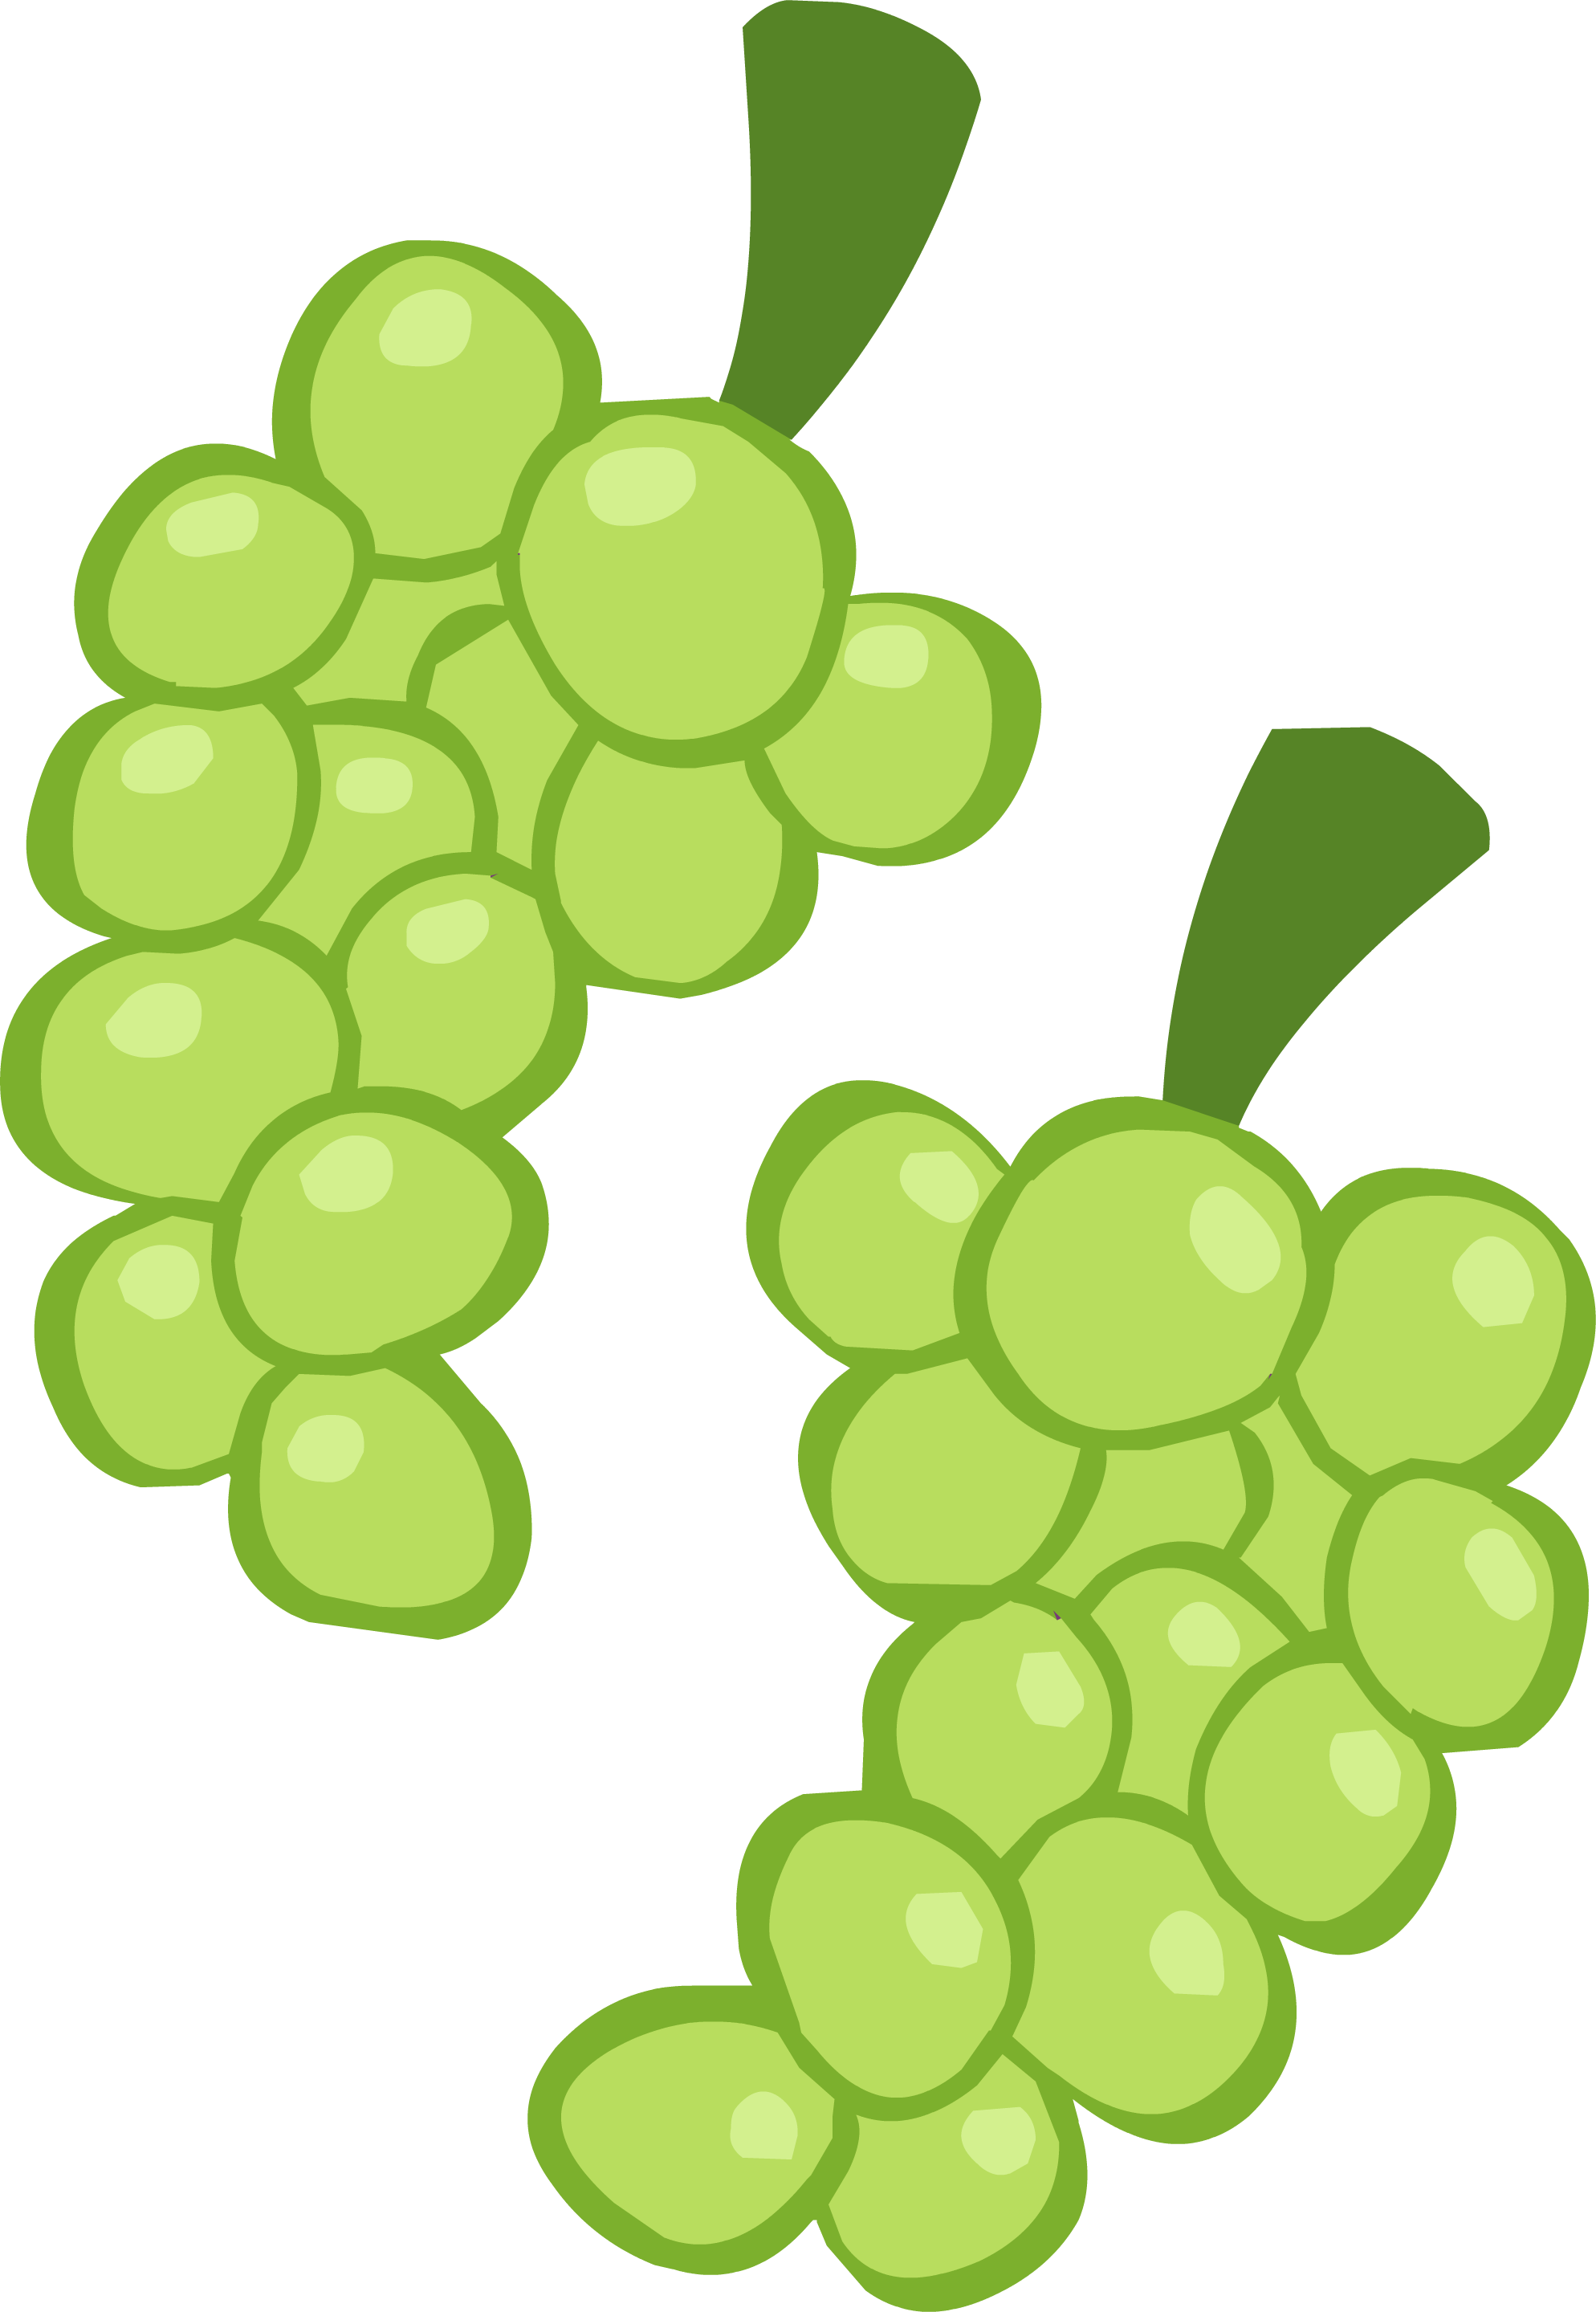 Ponymaker grapes free images at vector clip art image